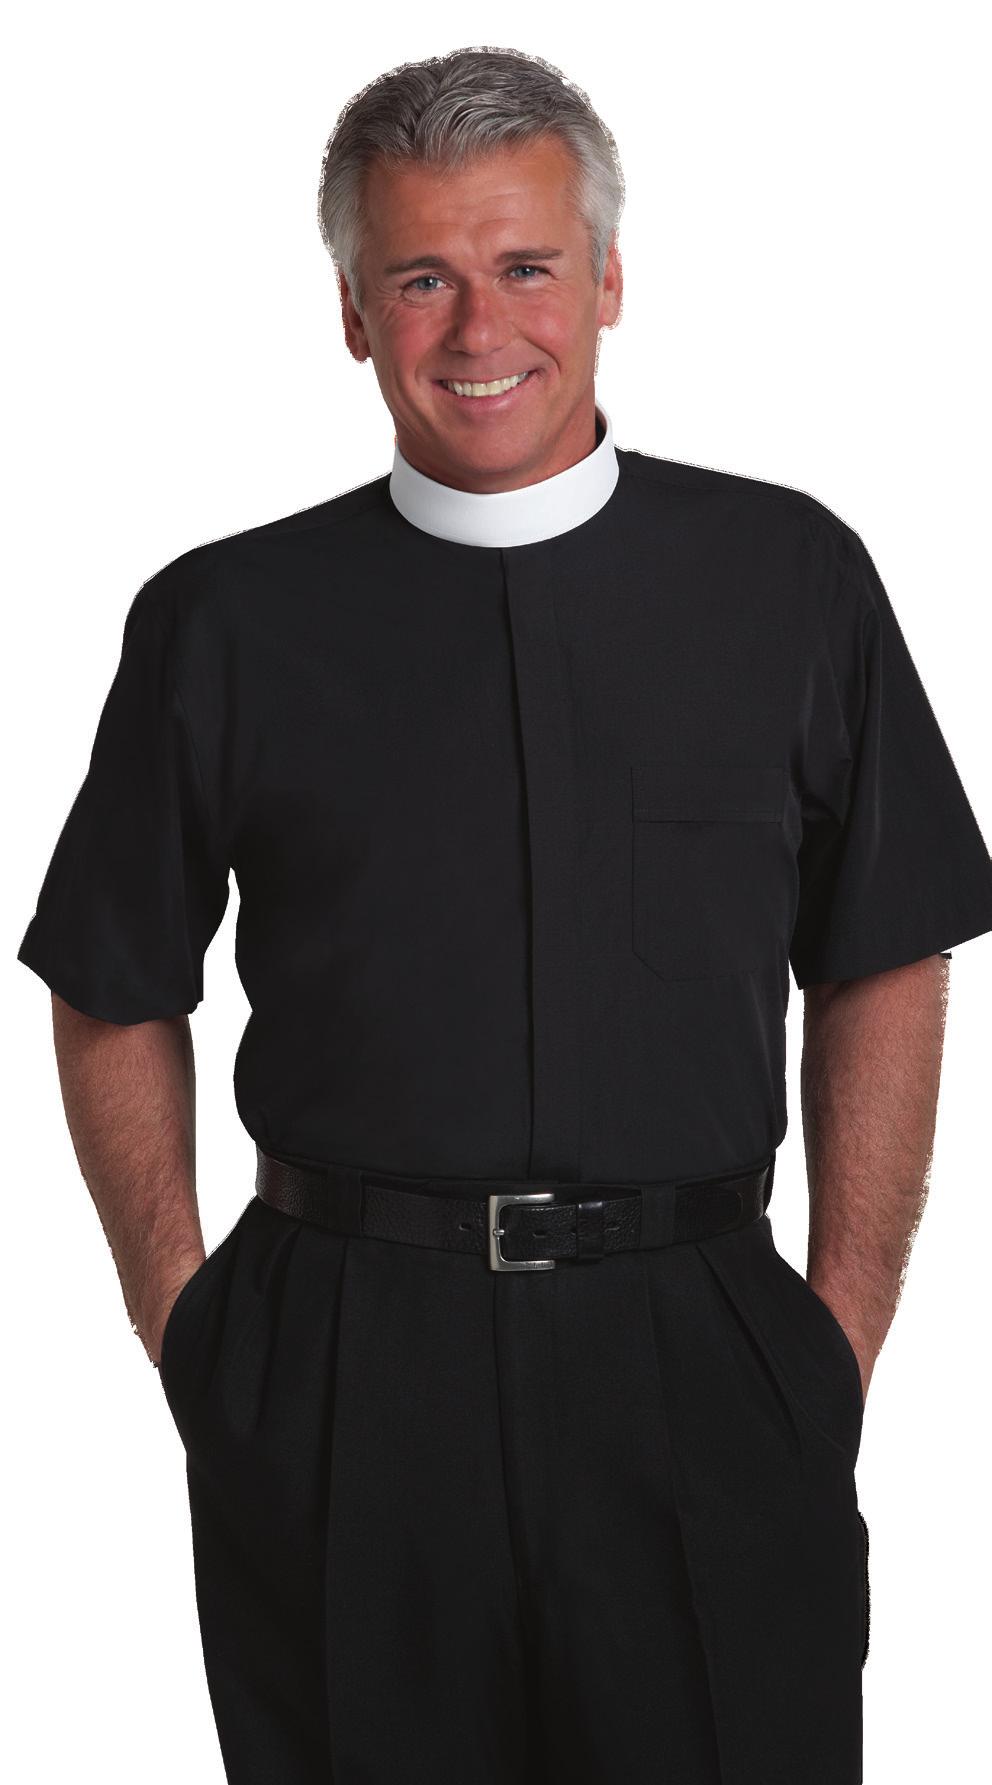 Prices effective January 1, 2018 through December 31, 2019 Men s Short Sleeve Banded Collar Clergy Shirts Generously